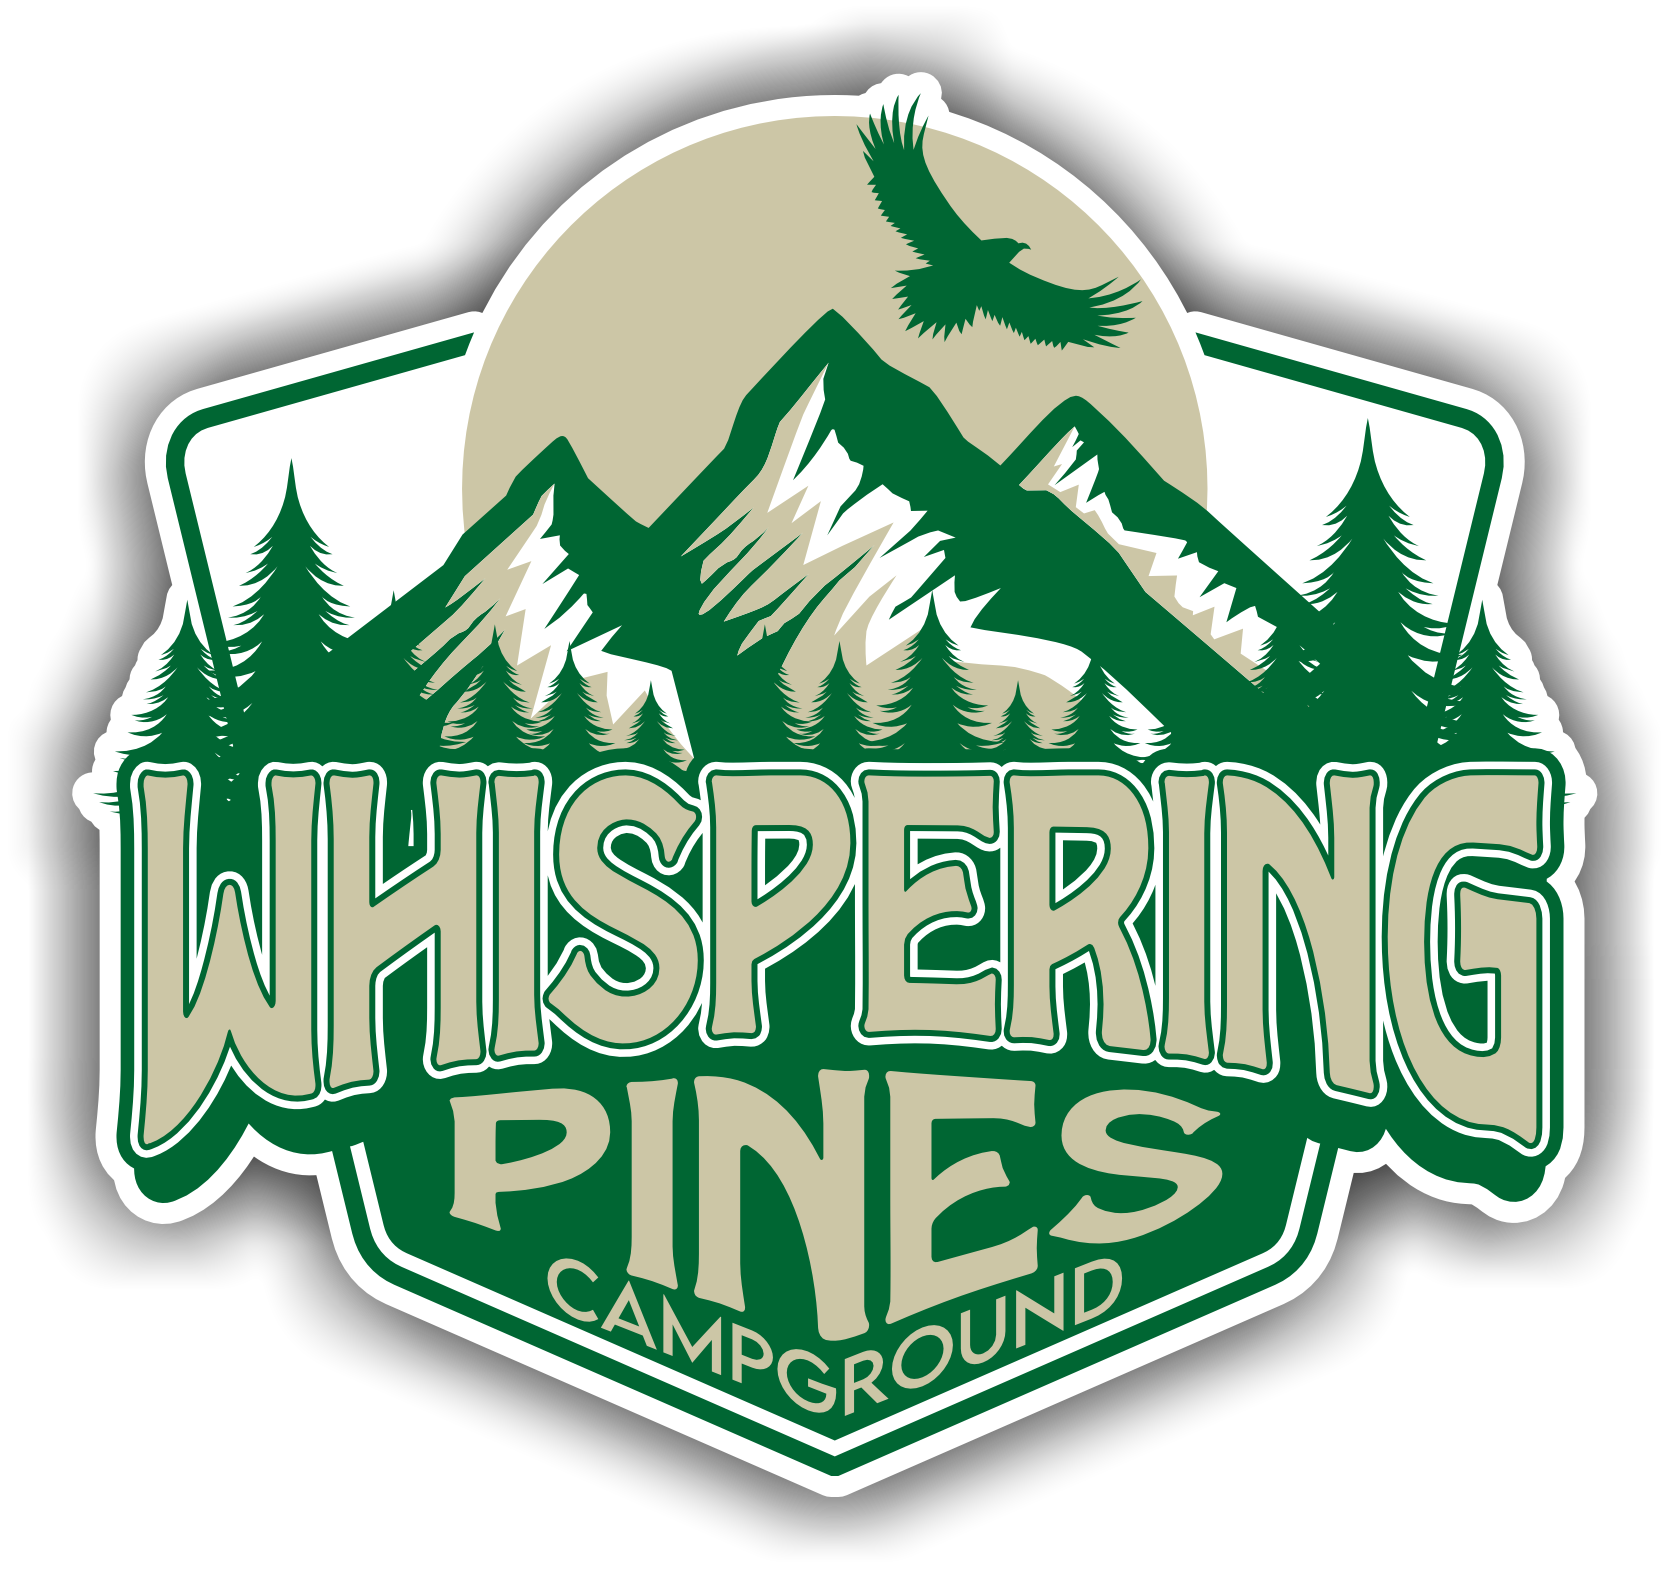 a logo for whispering pines campground with mountains and trees